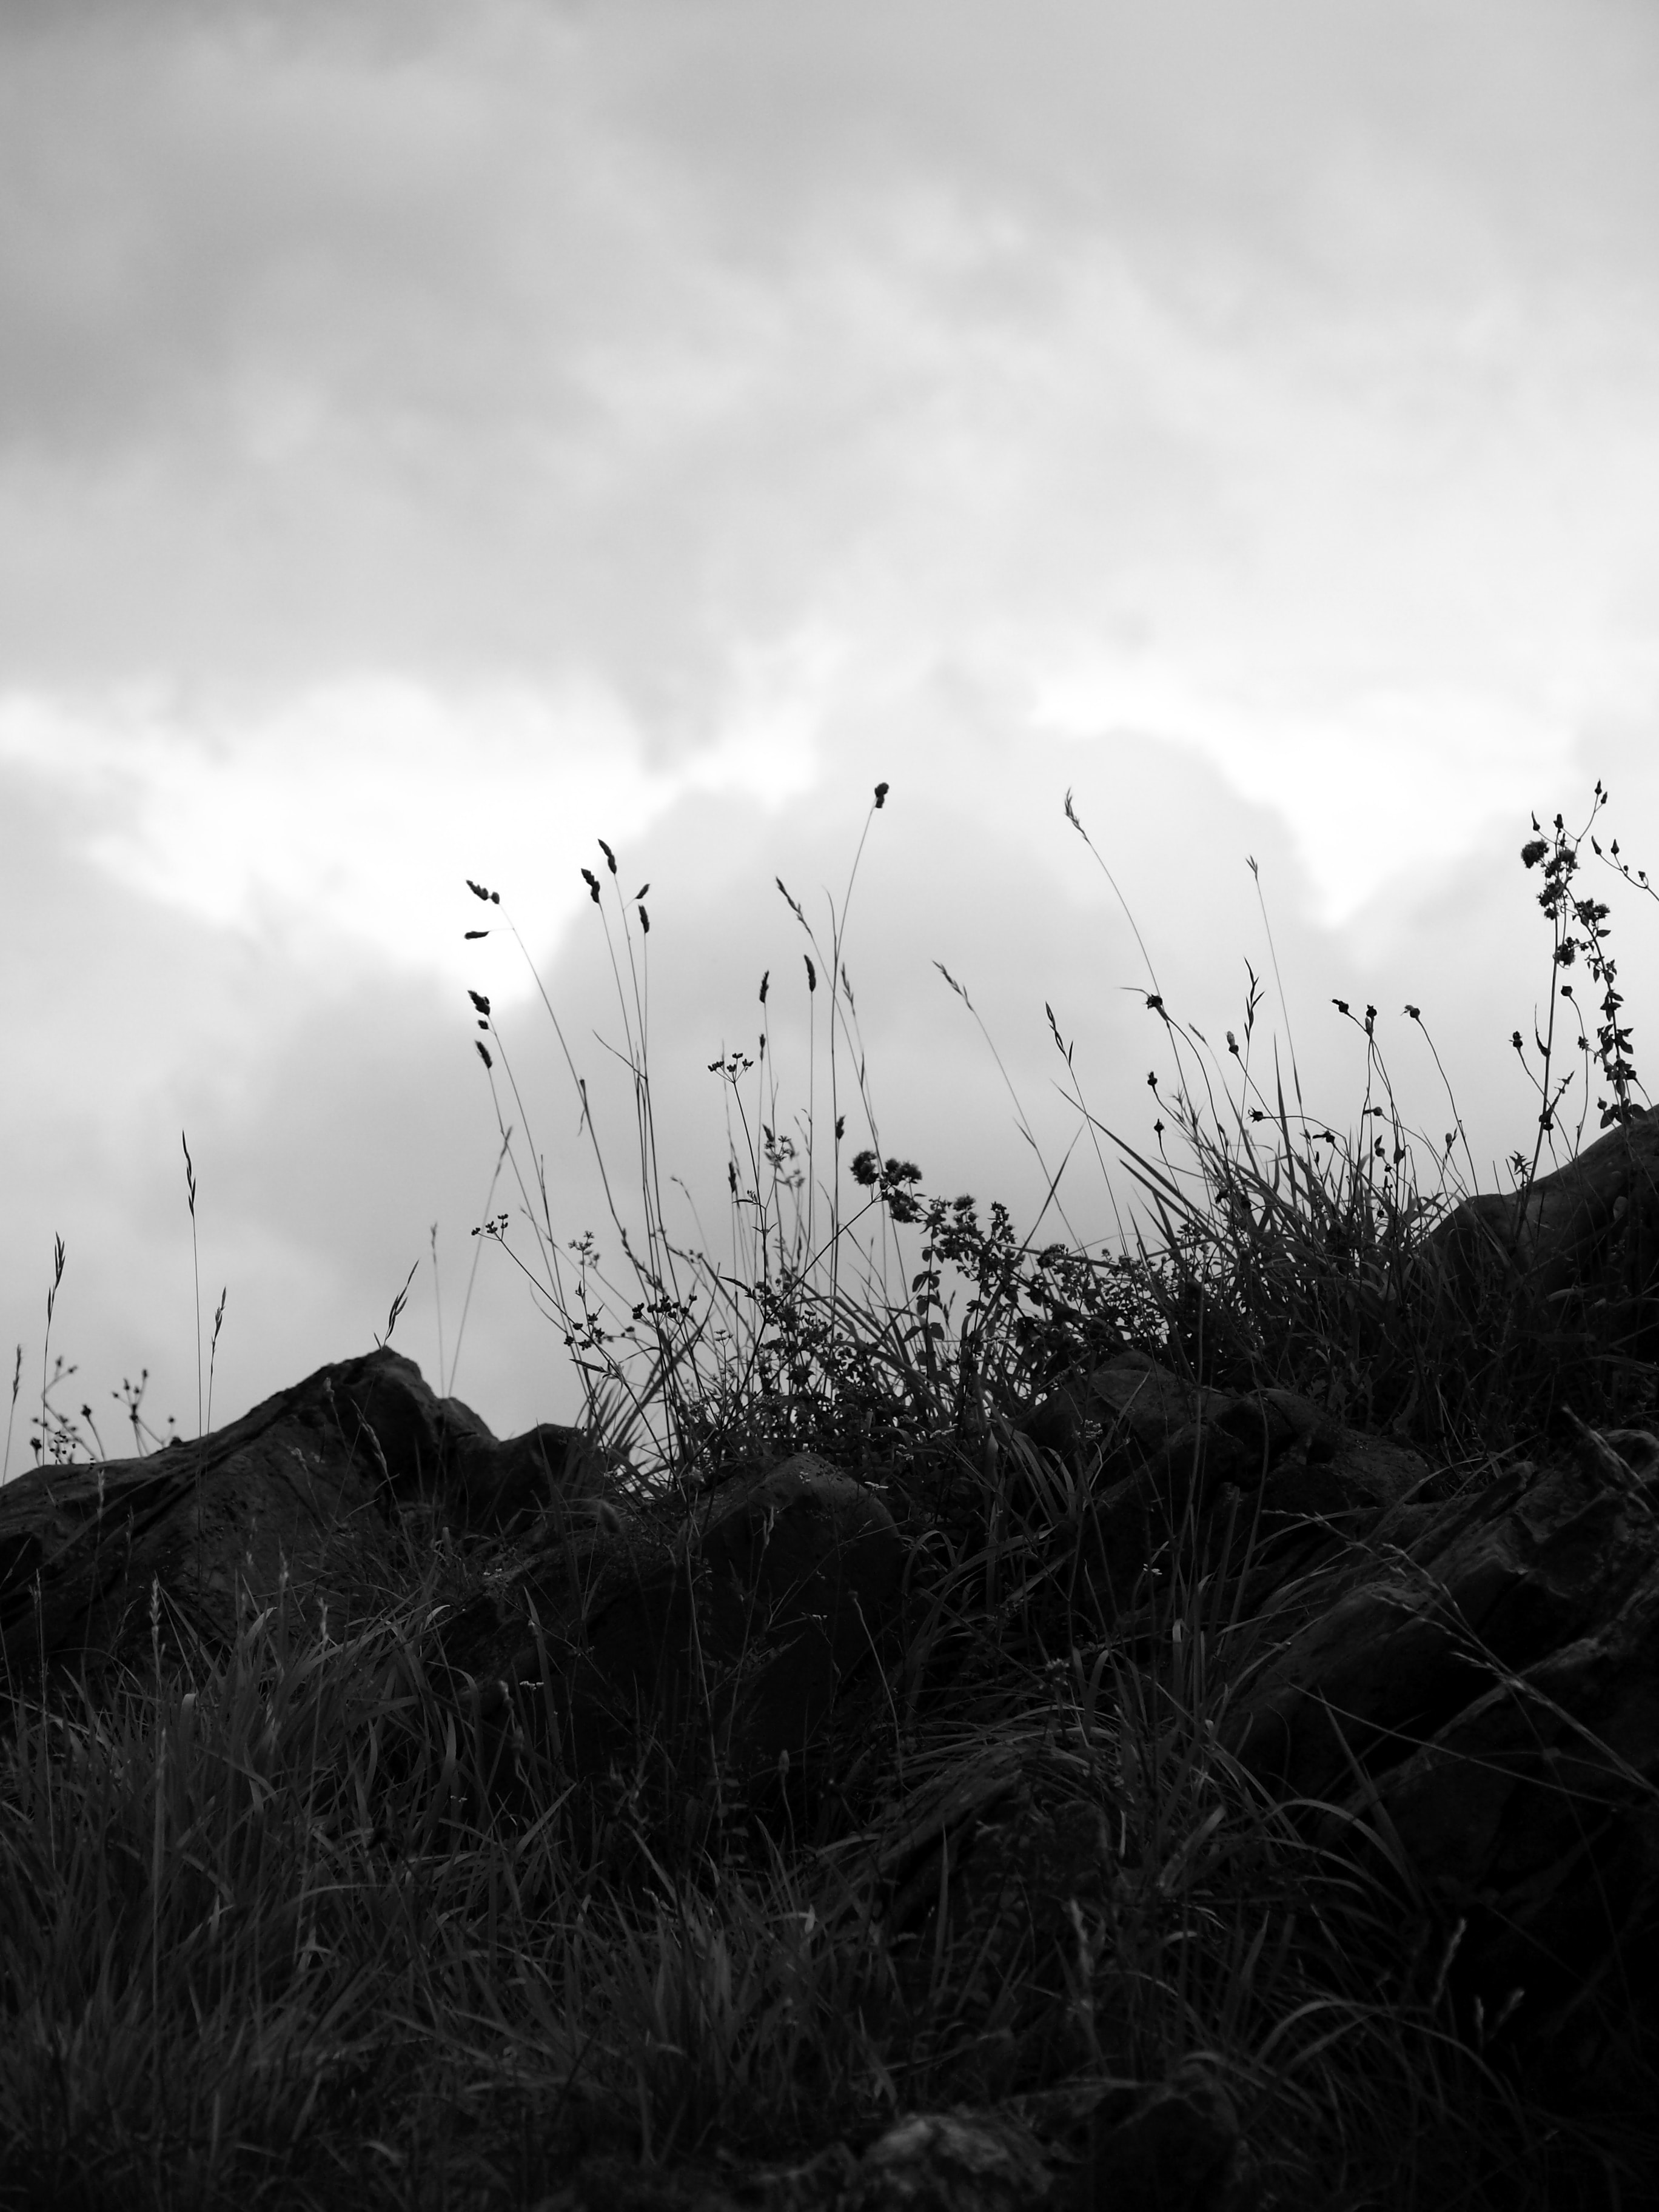 clouds, chb, nature, grass, stones, sky, bw, hill cellphone